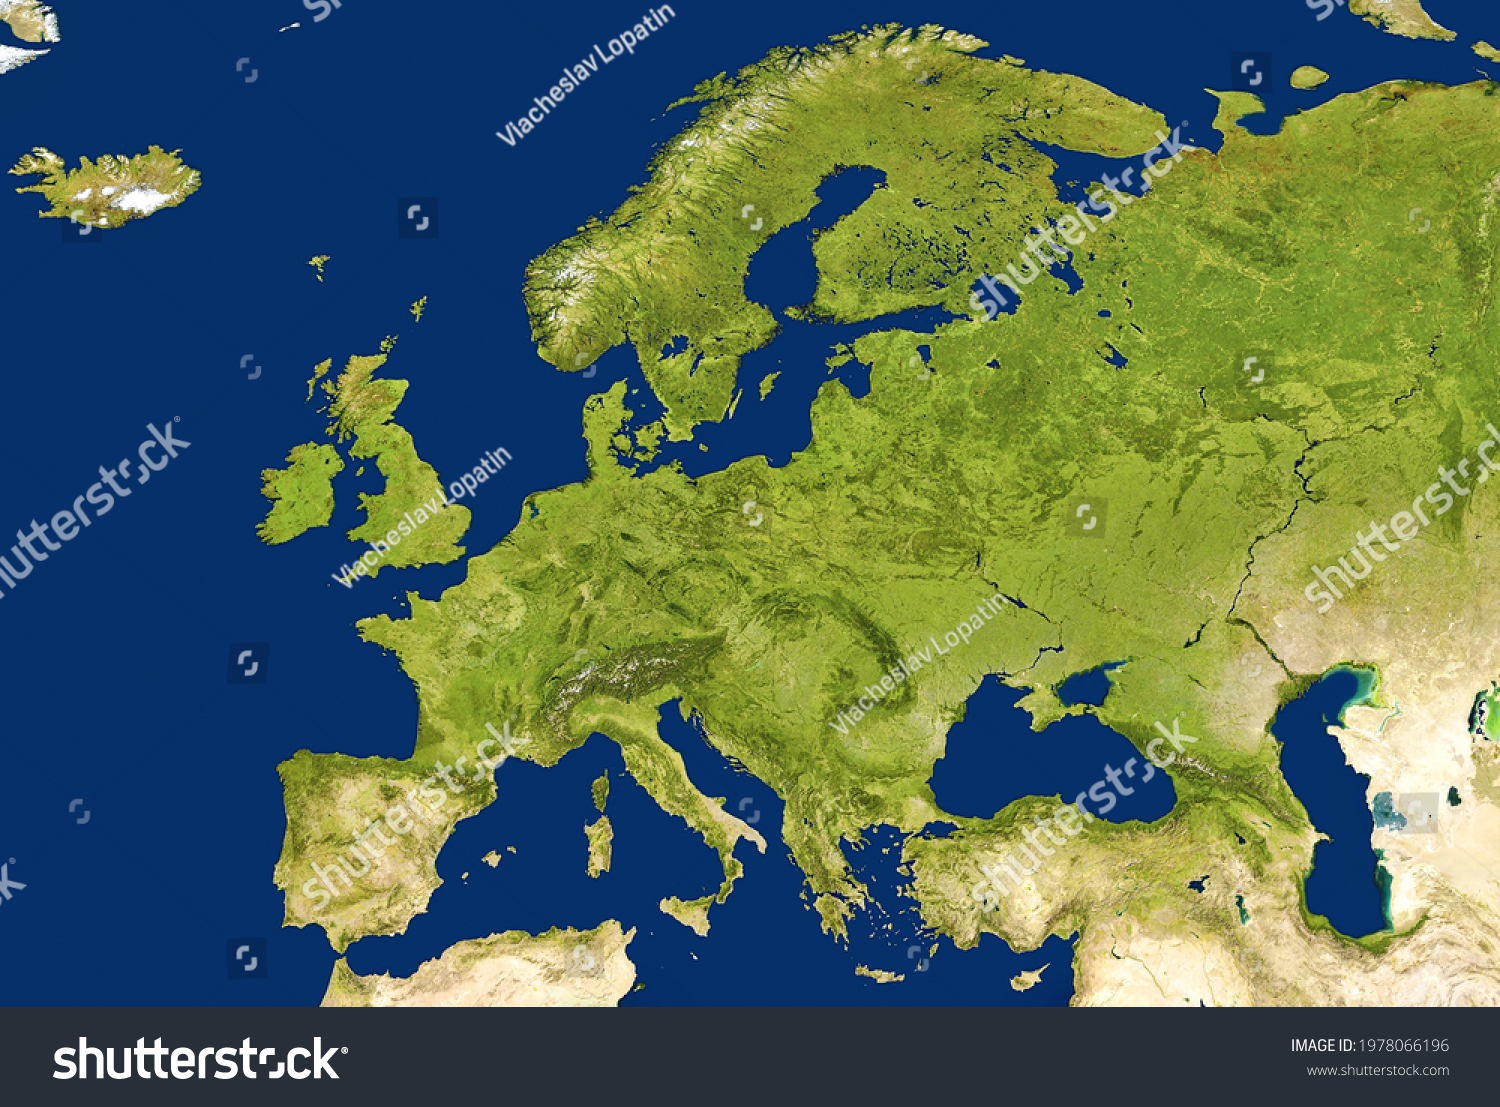 Europe map in satellite picture, flat view of European part of world from space. Detailed physical map with green land and blue seas. Europe and topography theme. Elements of image furnished by NASA. #1978066196